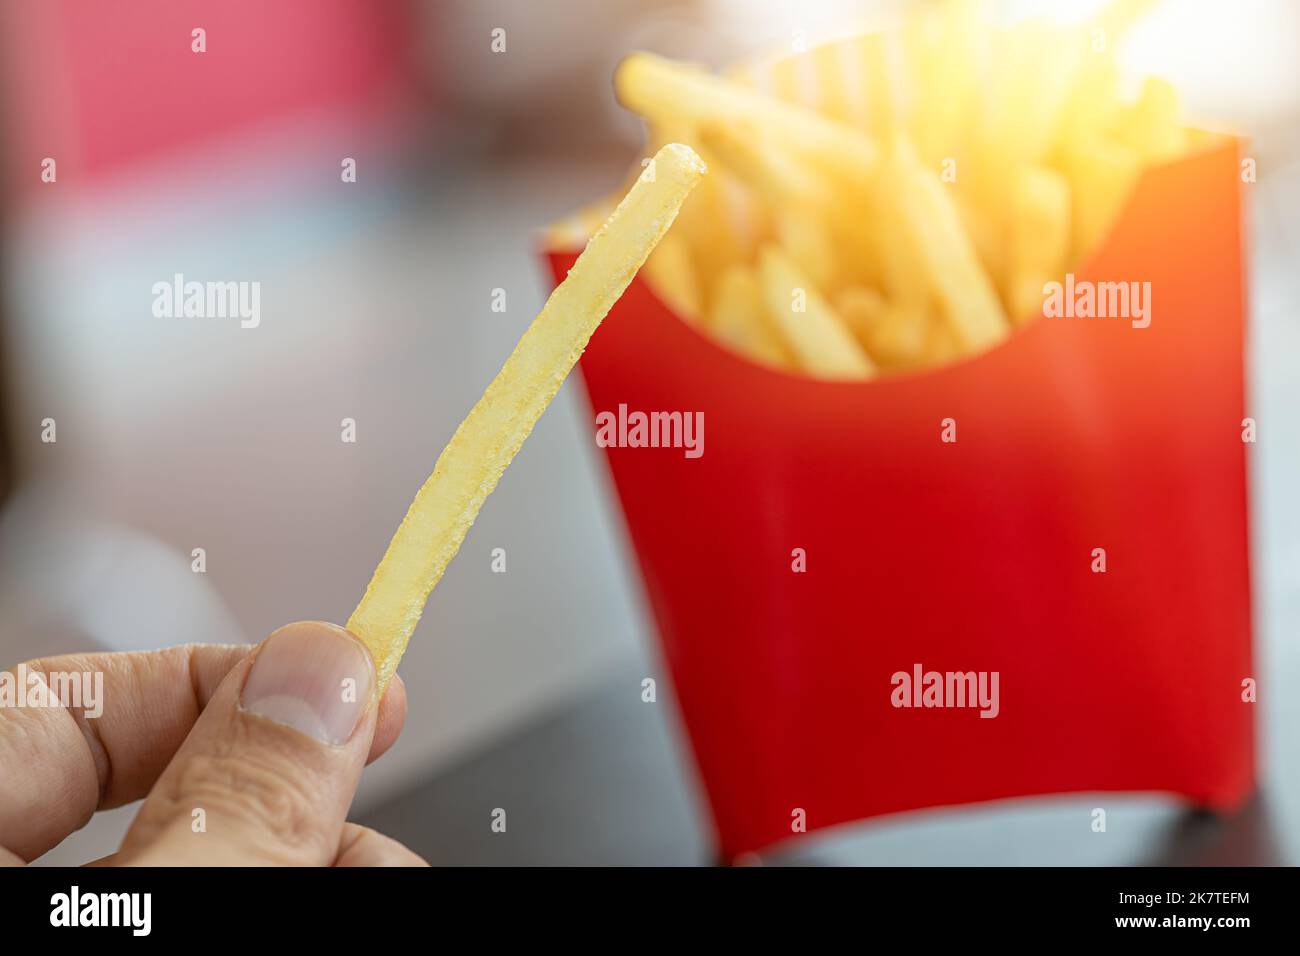 french fries. closeup male hand holding golden potato stick fry popular american fast food. Stock Photo